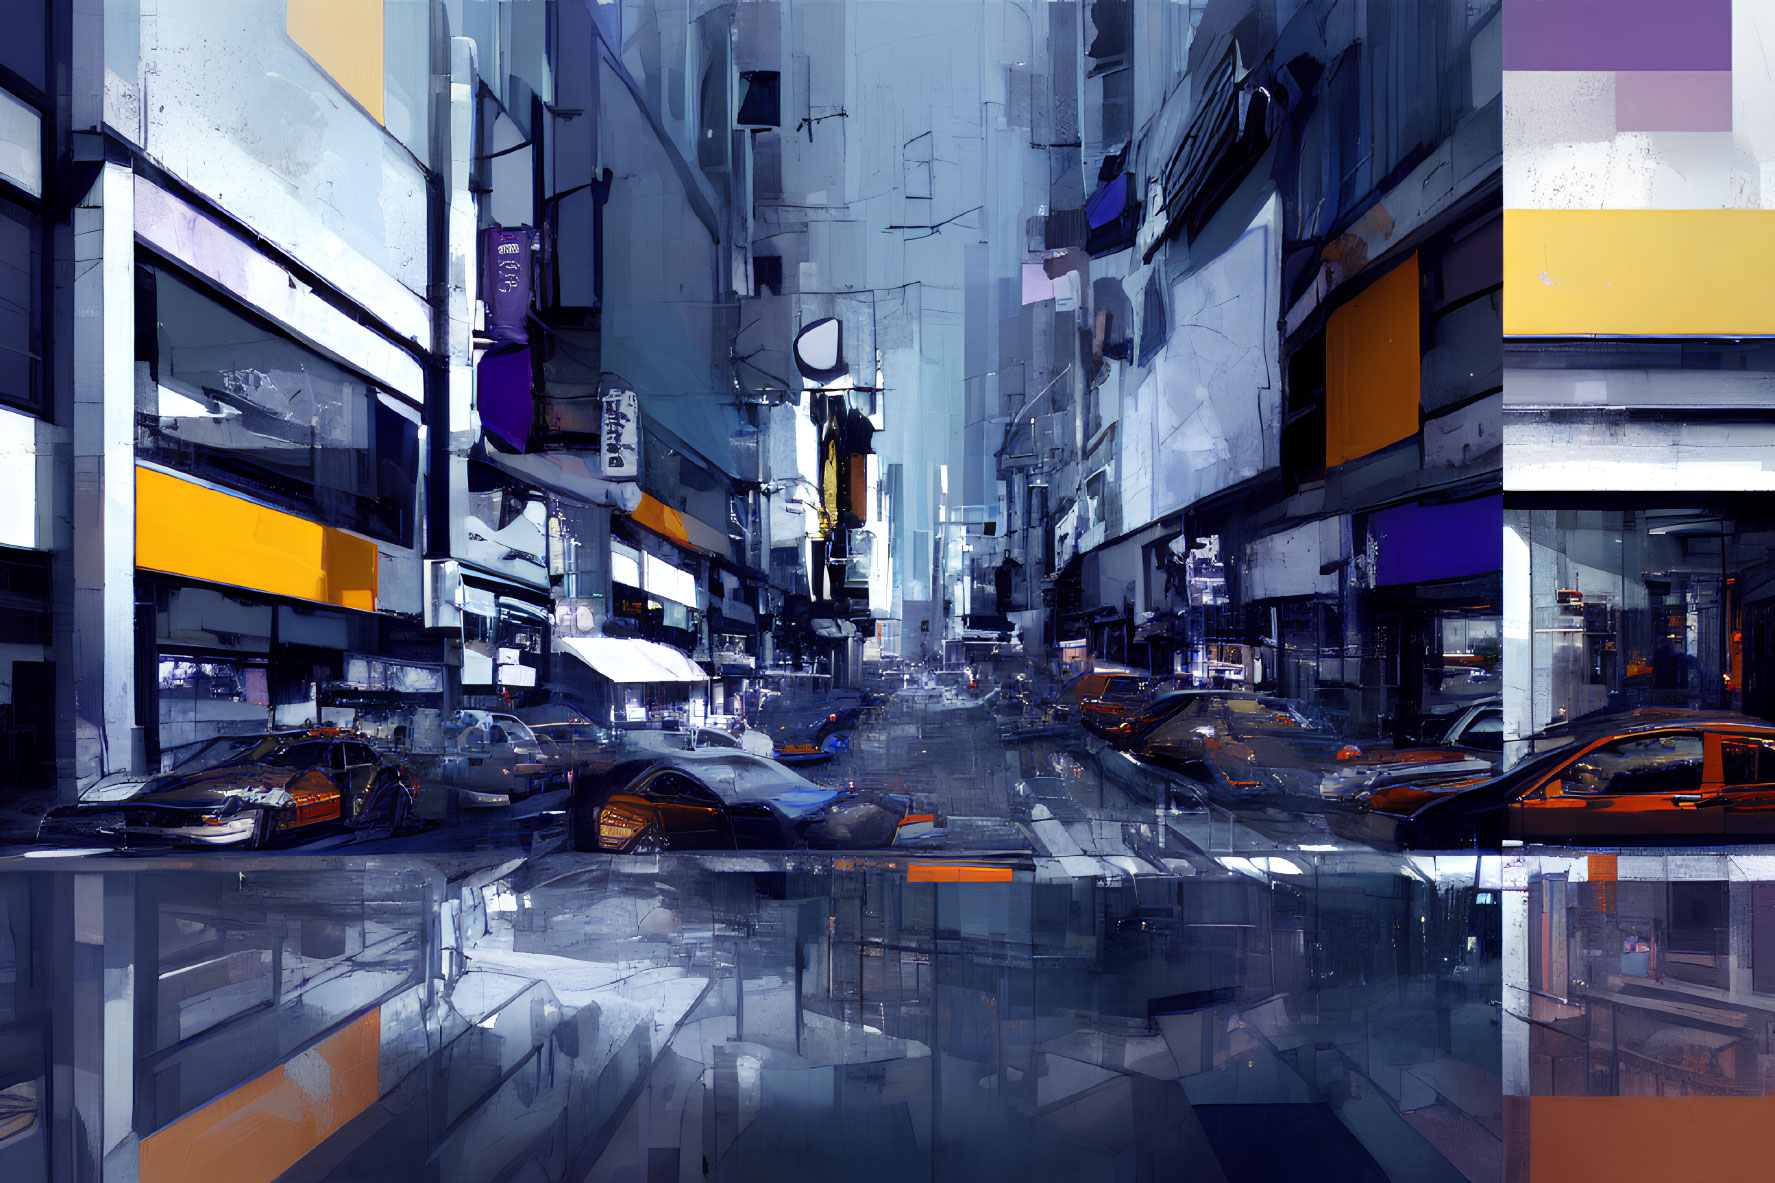 Colorful Futuristic City Street with Reflective Surfaces and Sleek Vehicles